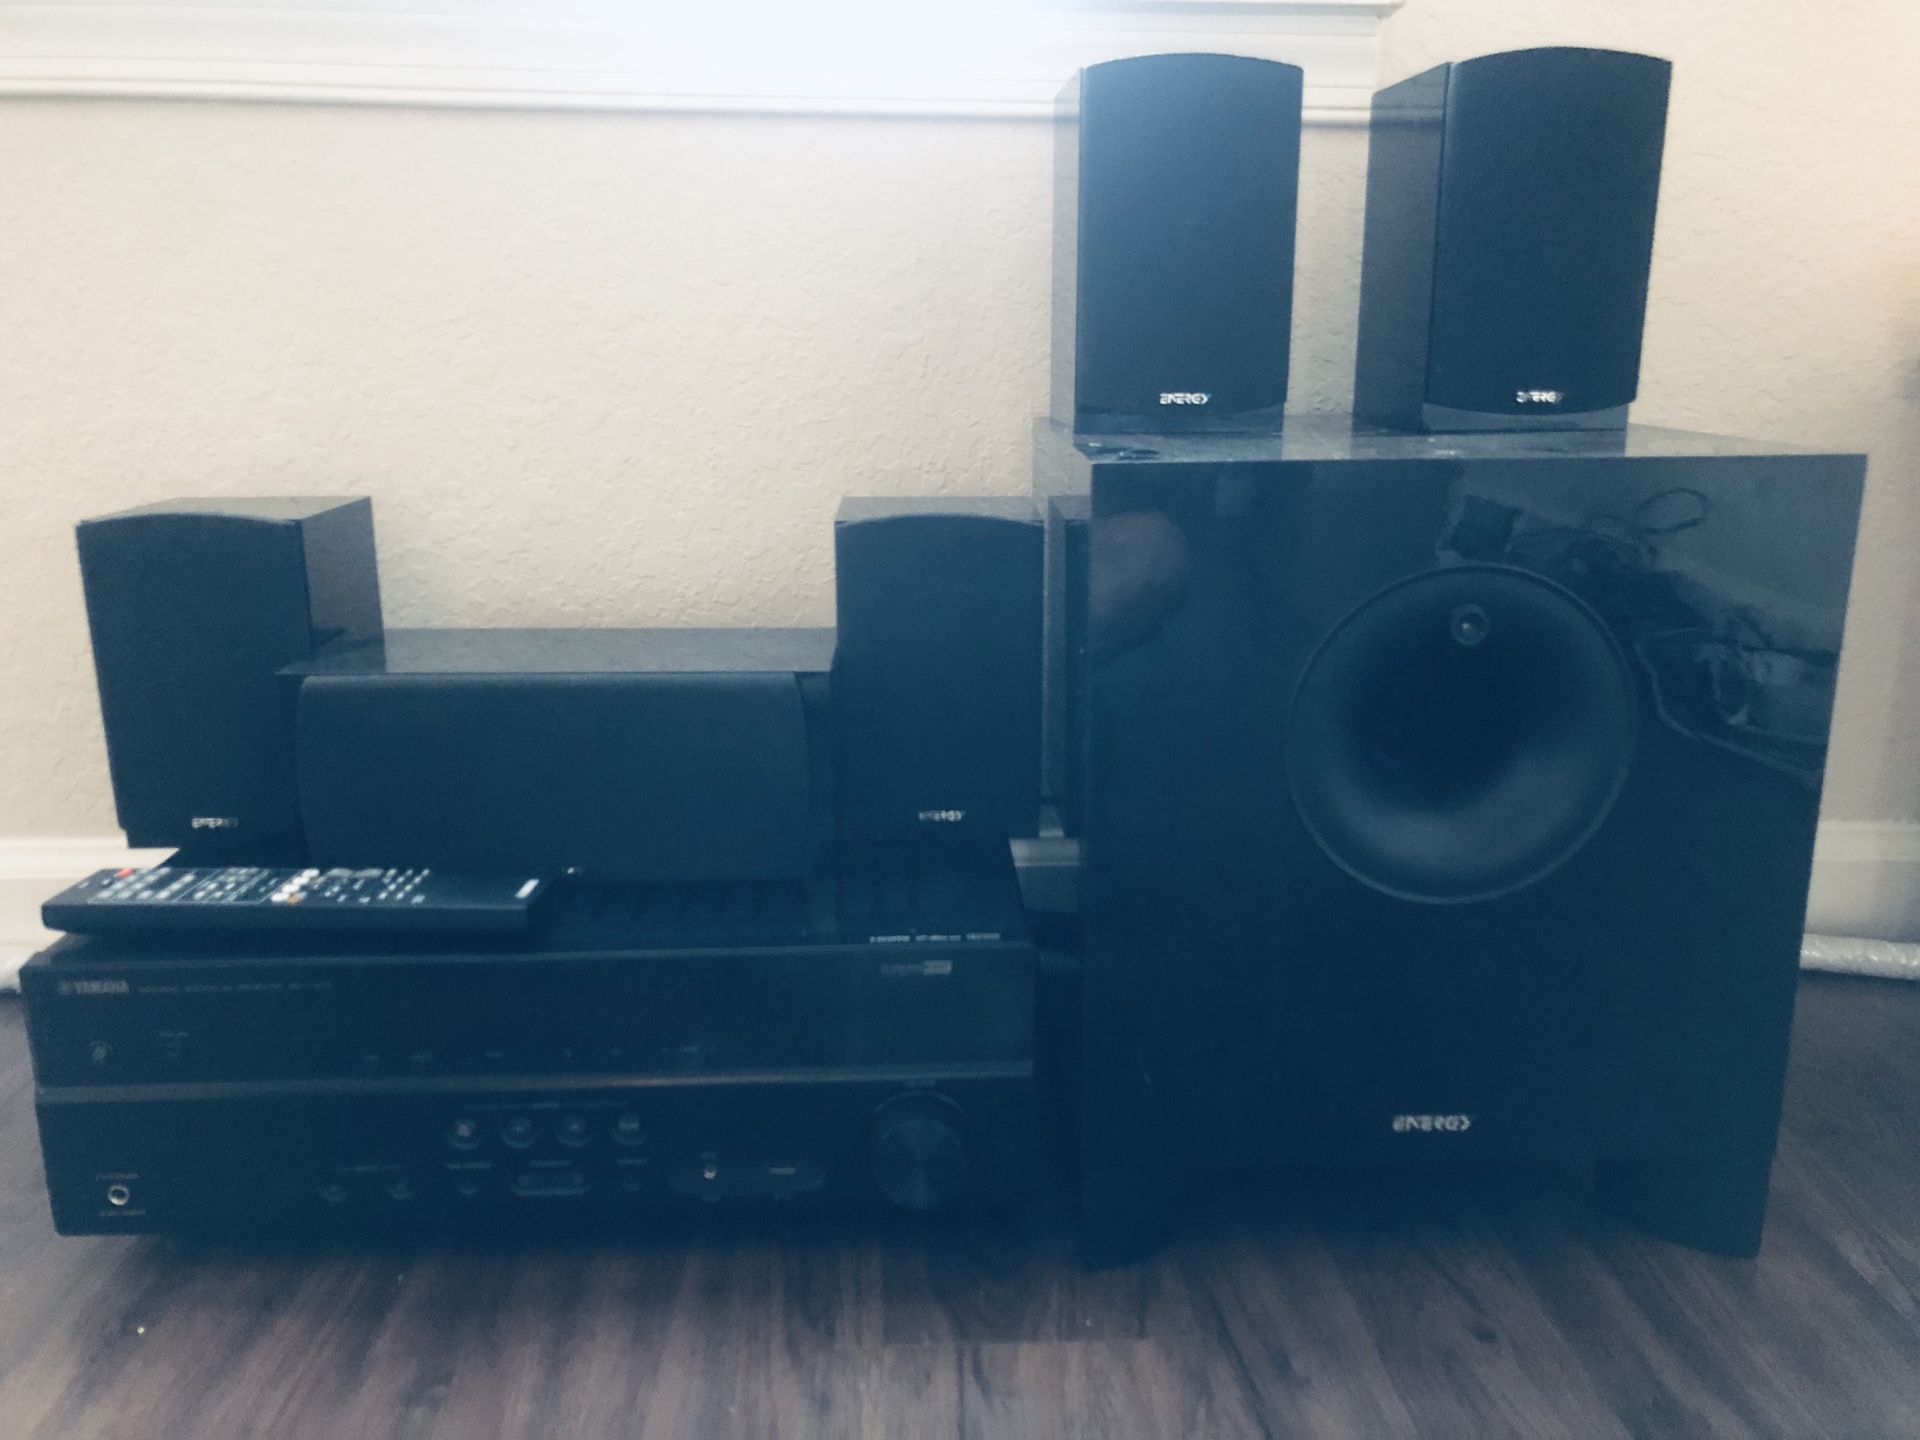 Yamaha Home Theater with 5 speakers, extra bass speaker & remote control